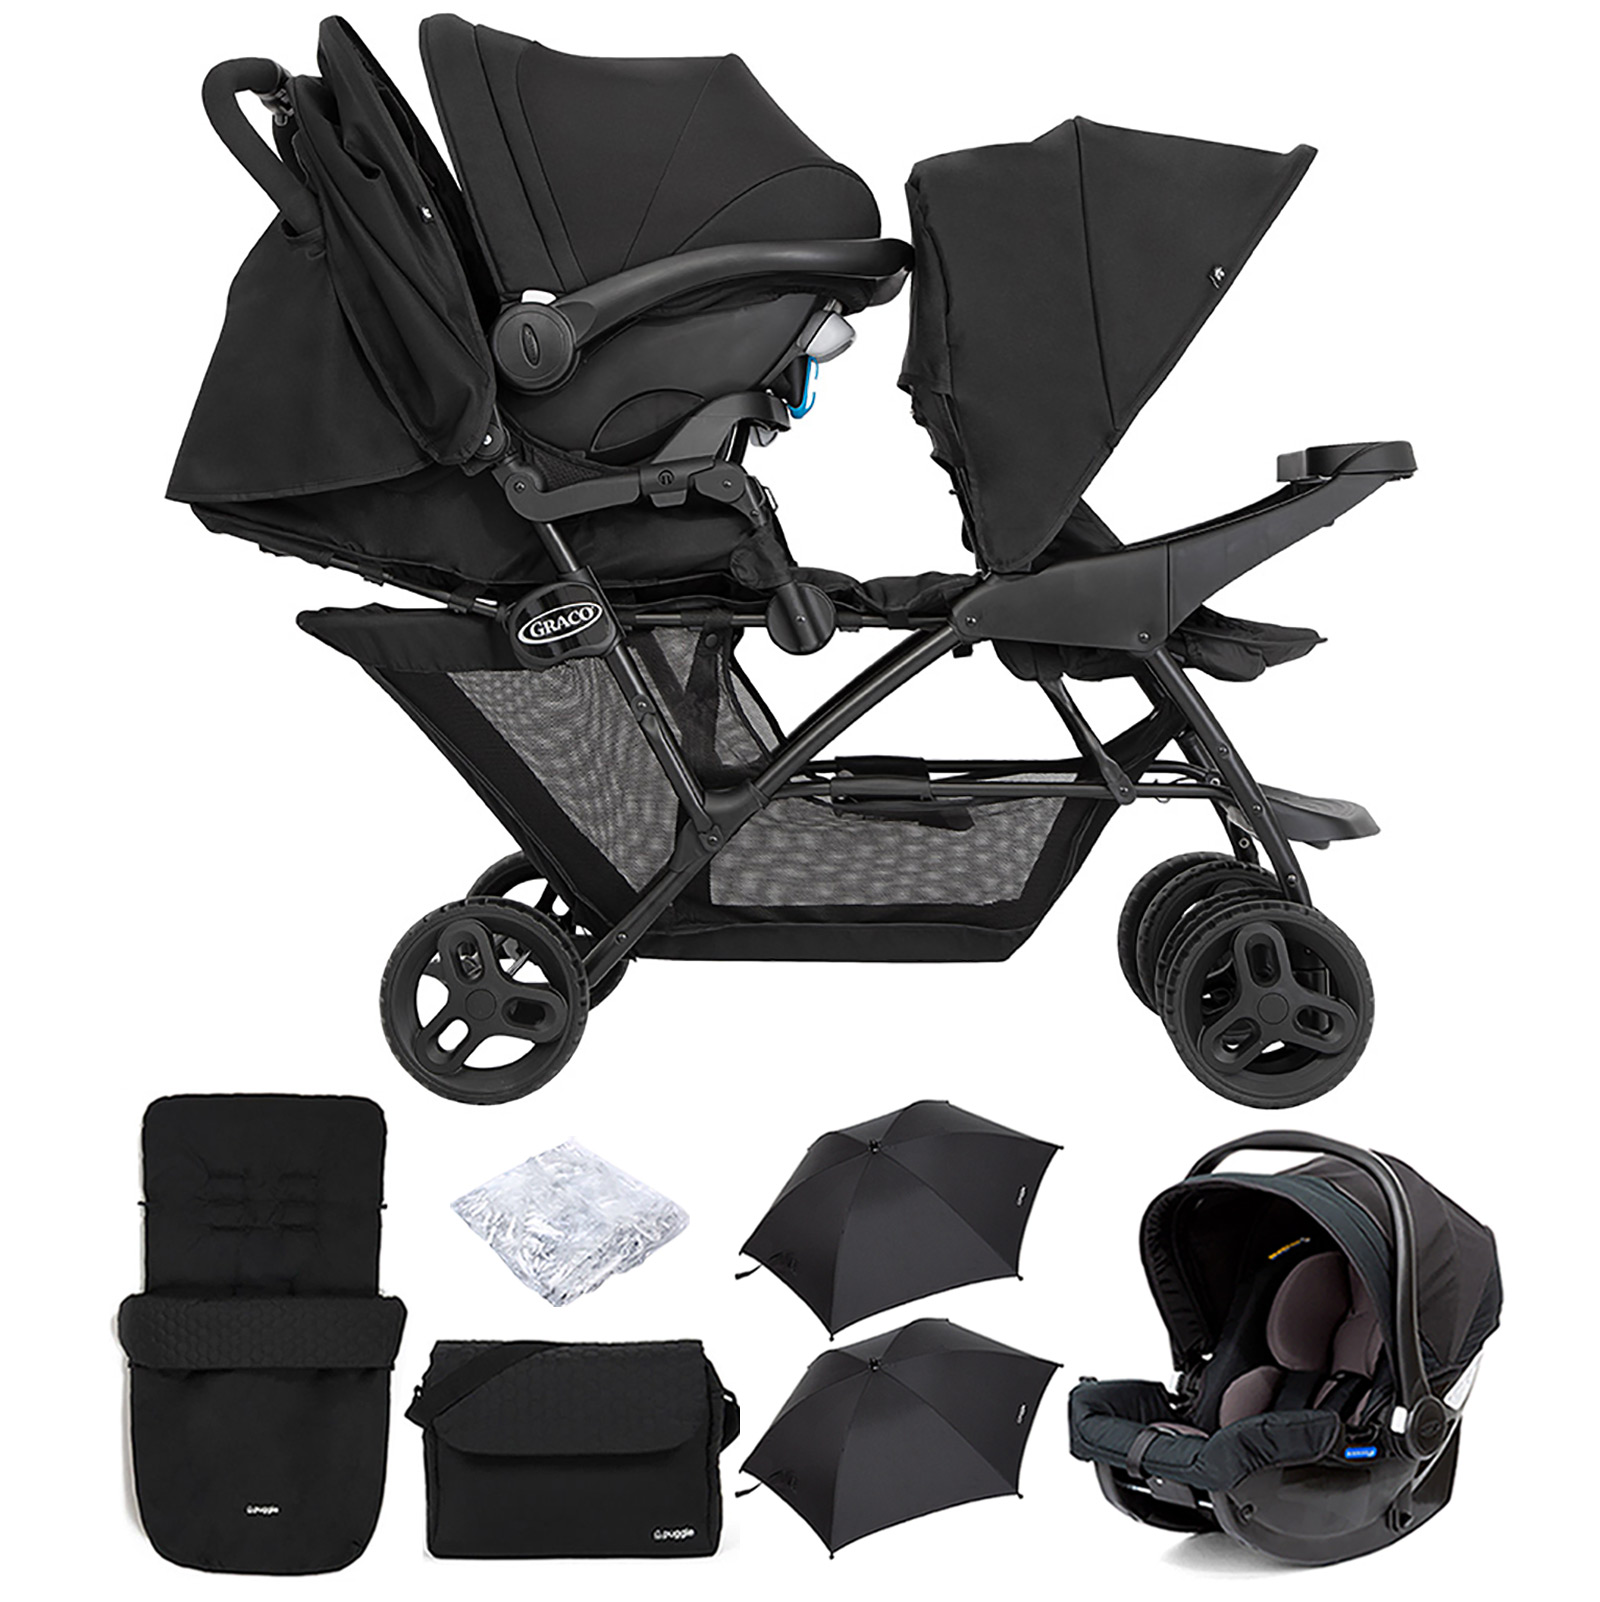 Graco Blaaze™ Stadium Duo Tandem Travel System with Front Apron, Raincover, Footmuff, Changing Bag, Car Seat & 2 Parasols - Night Sky